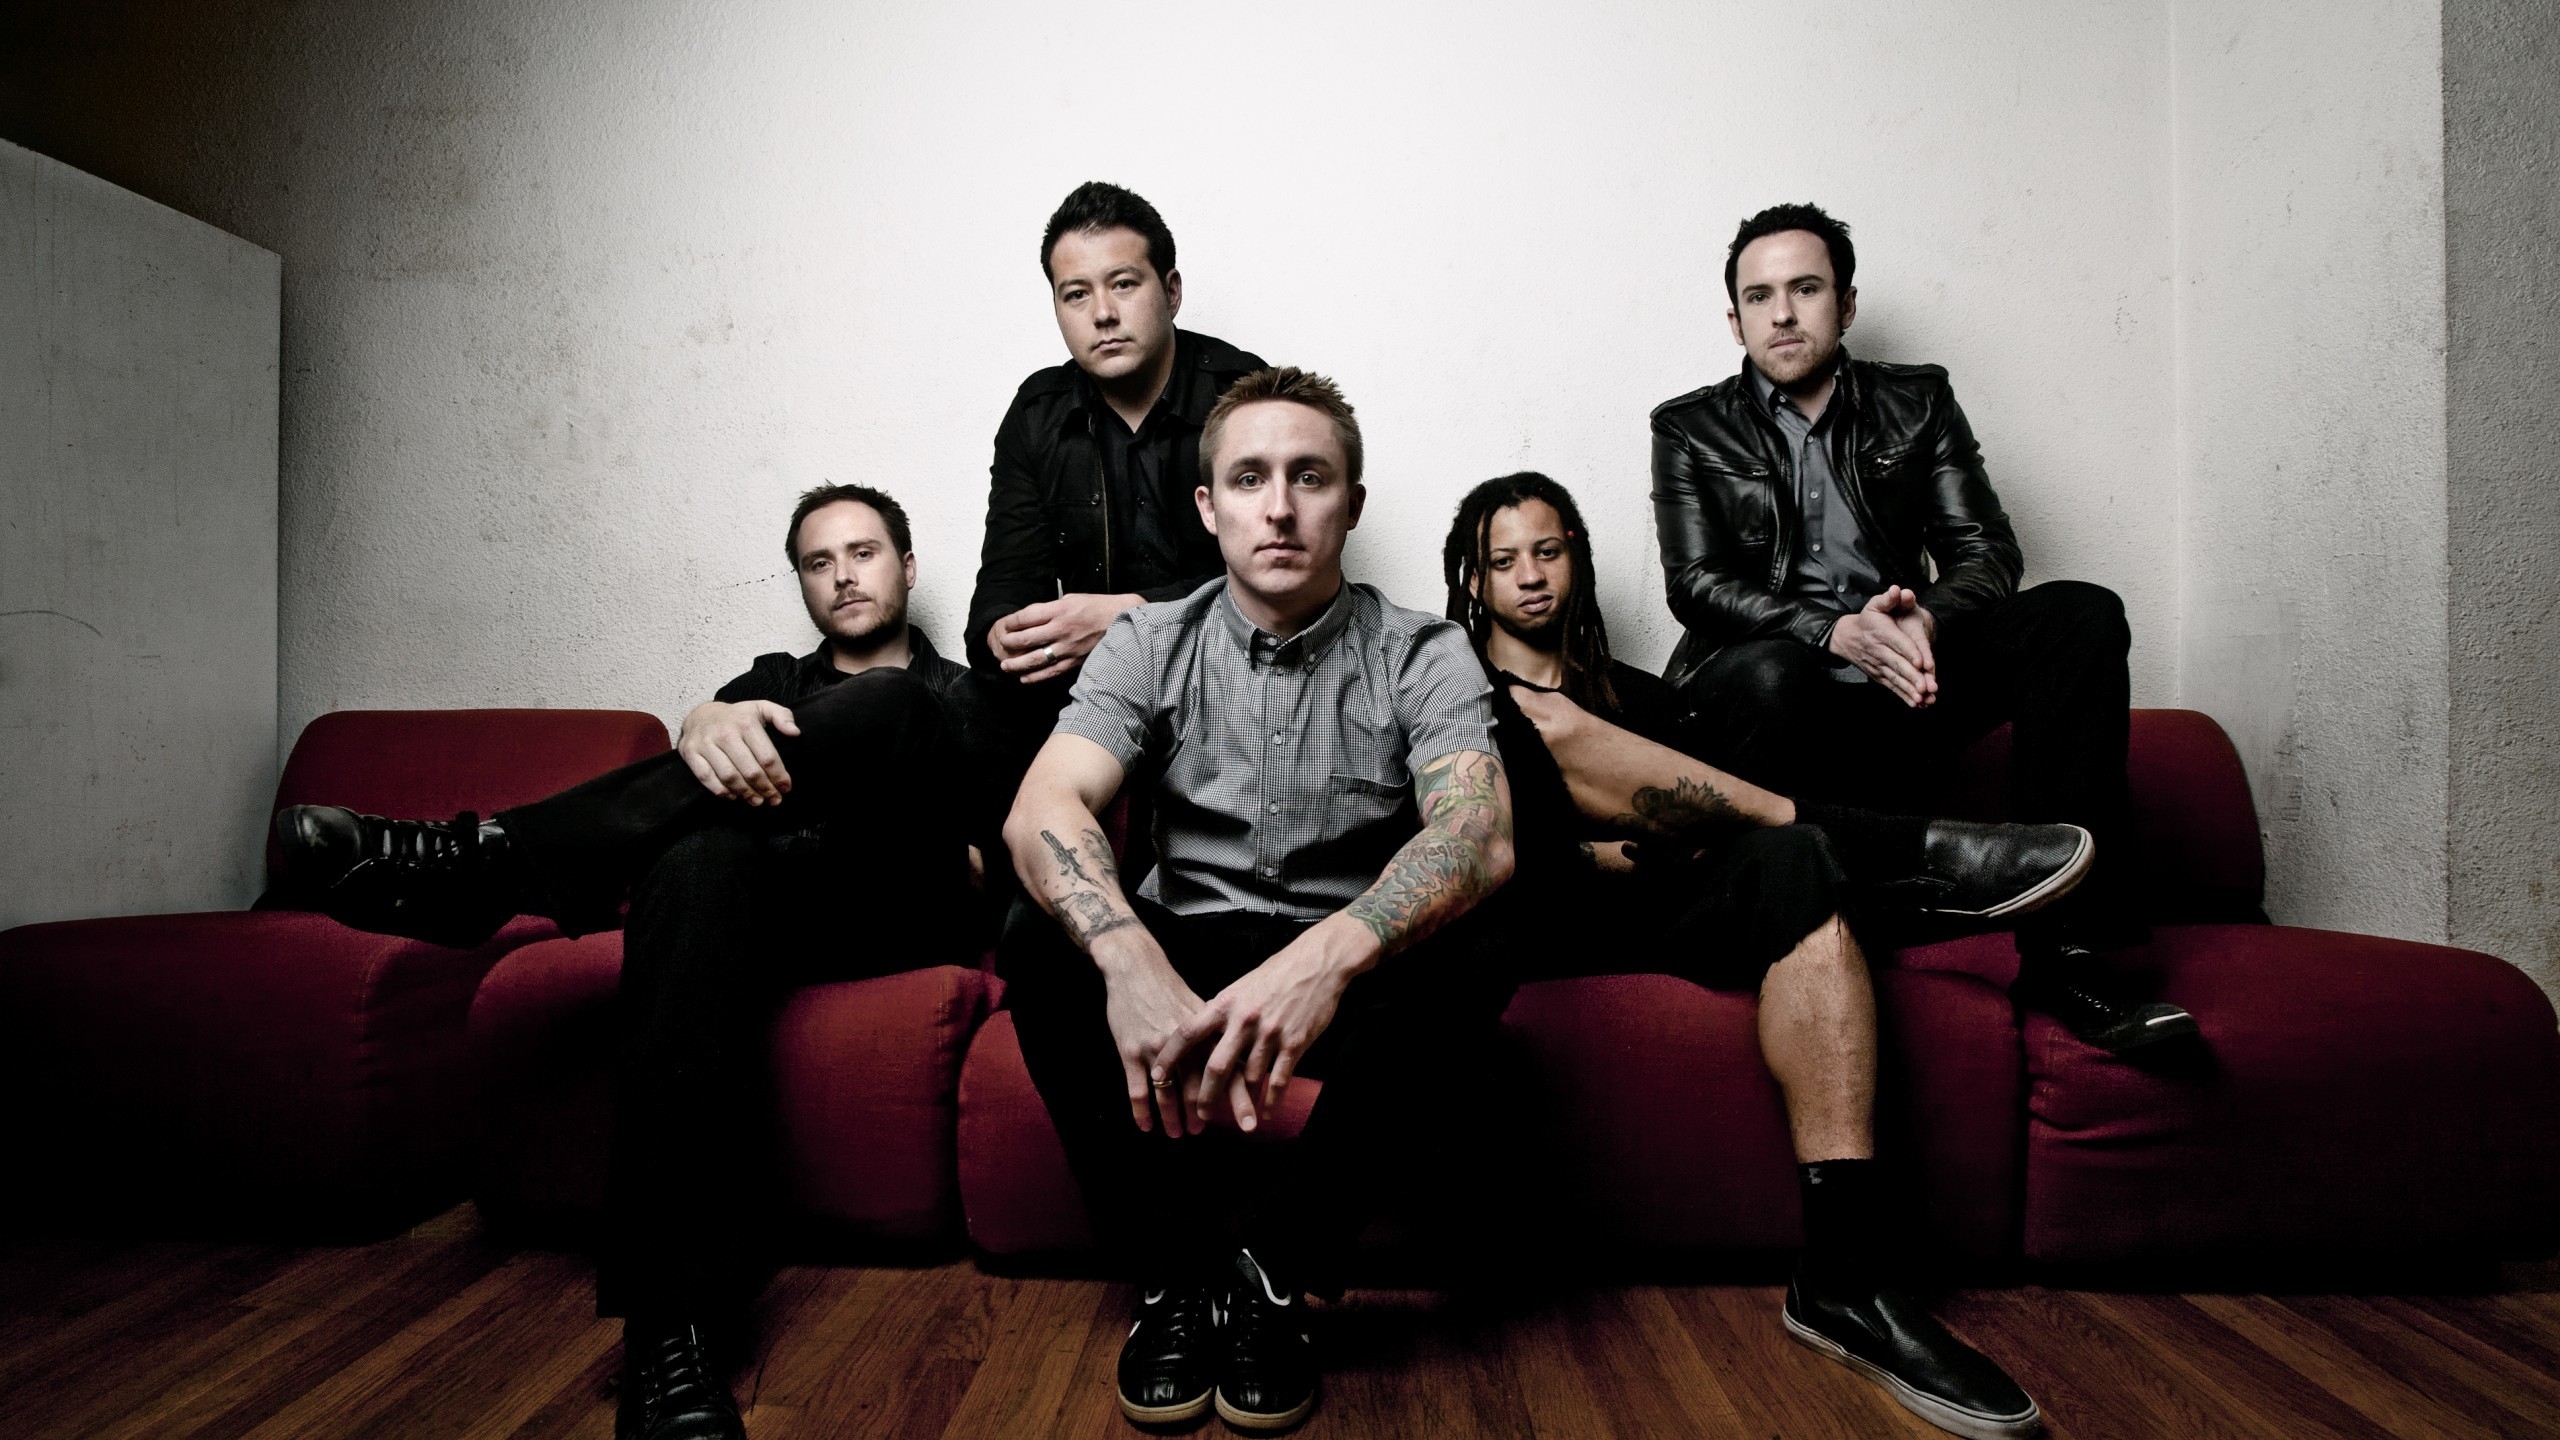 Yellowcard Poster for 2560x1440 HDTV resolution